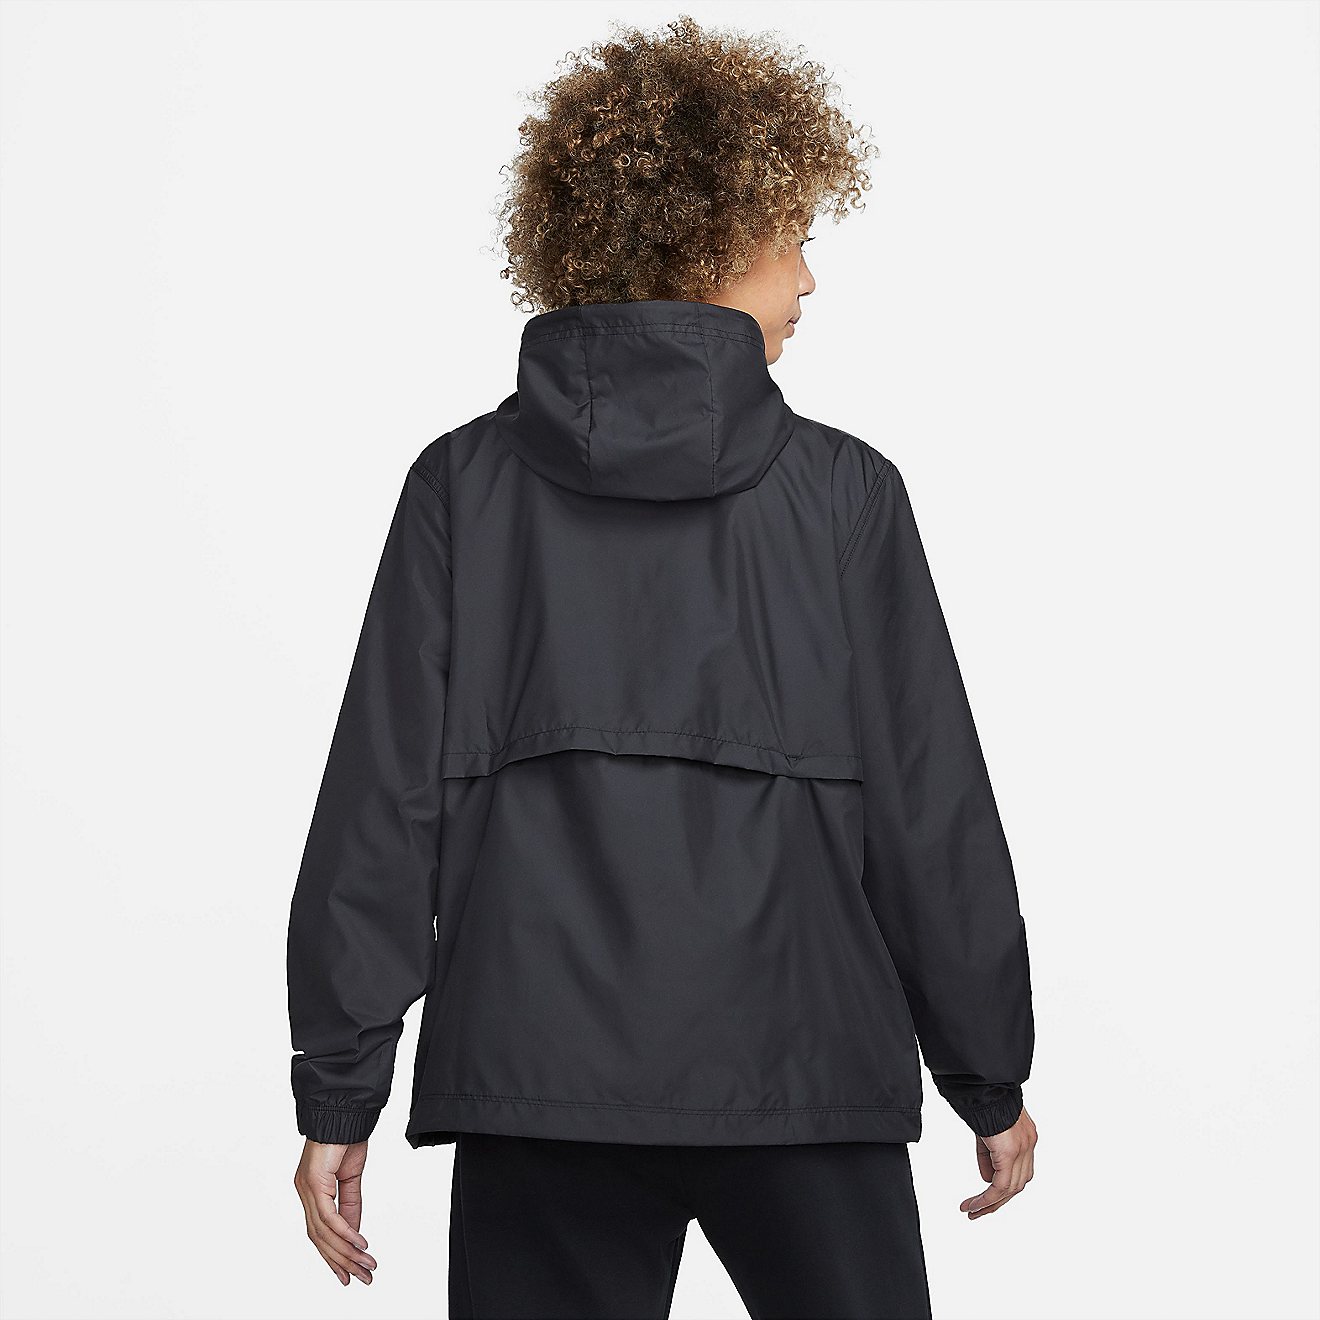 Nike Women's Essential Woven Repel Jacket                                                                                        - view number 2